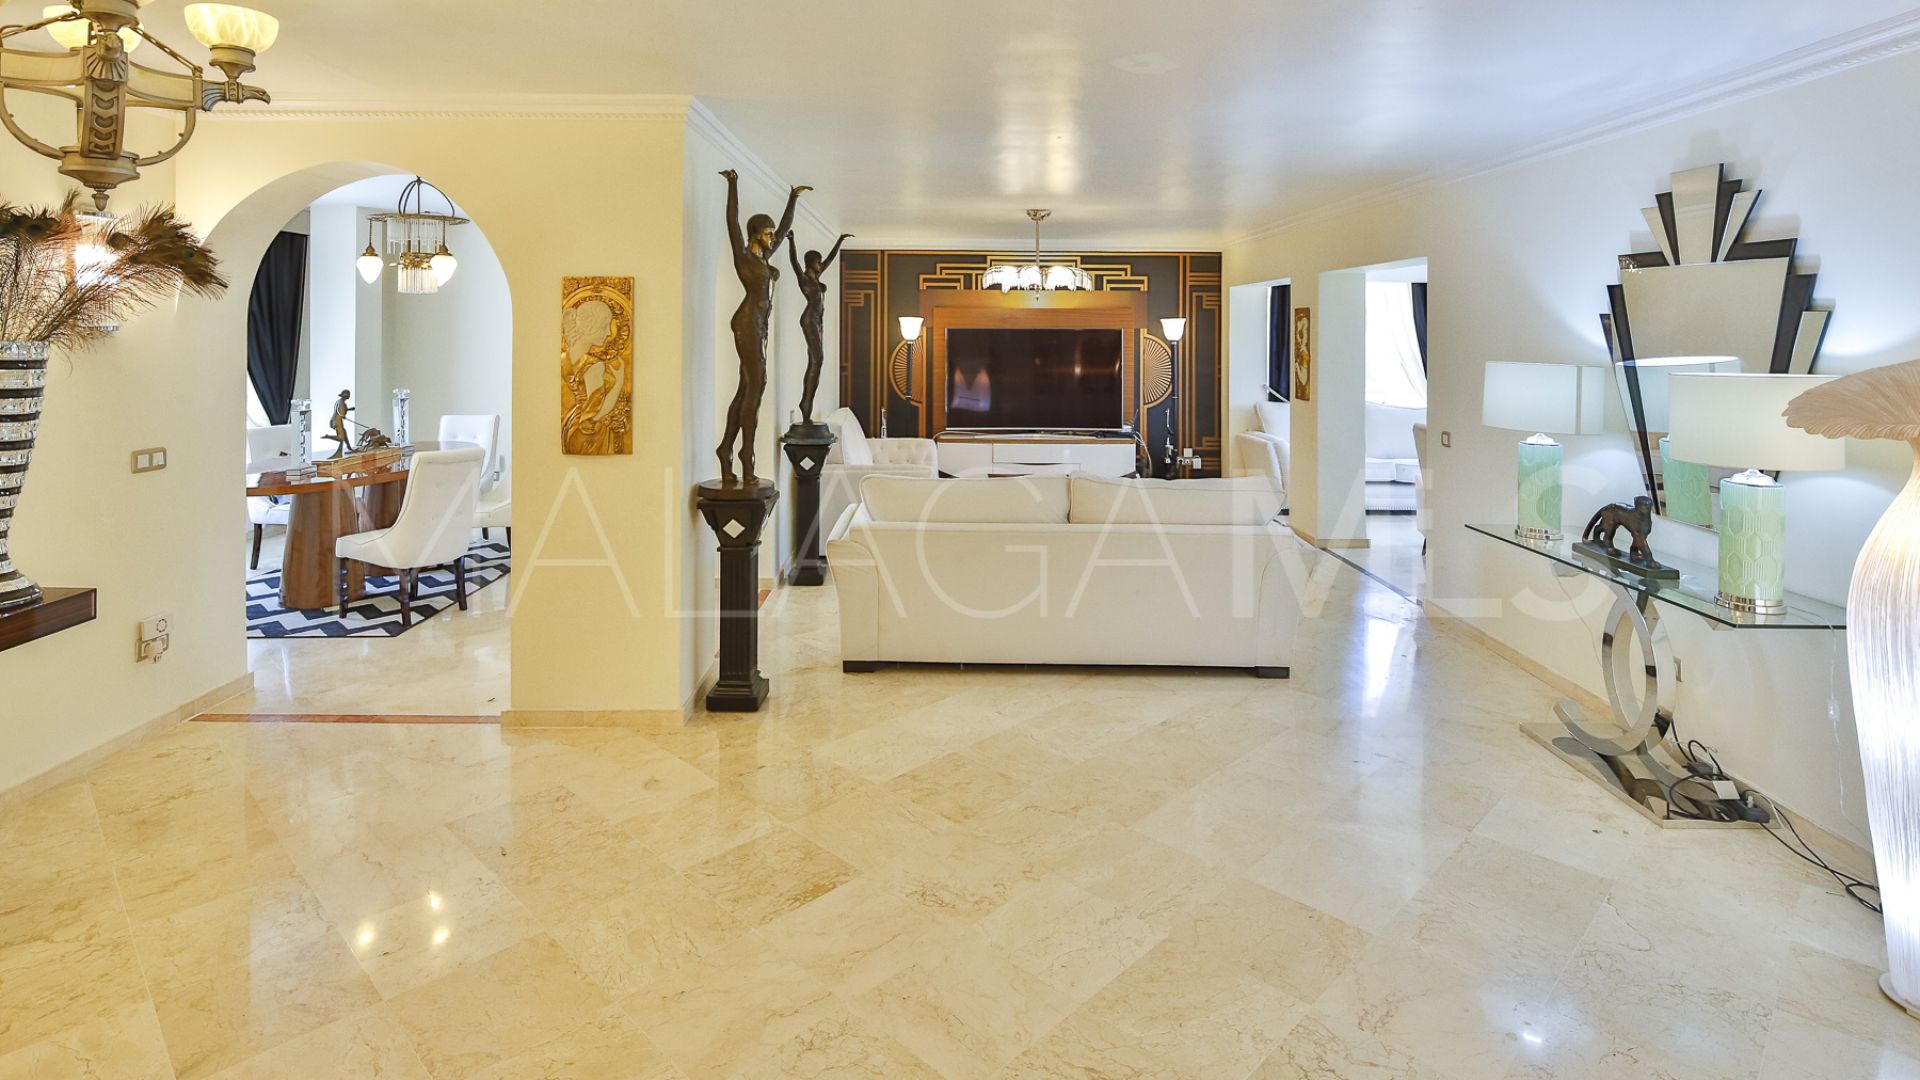 For sale Guadalmina Alta duplex penthouse with 3 bedrooms